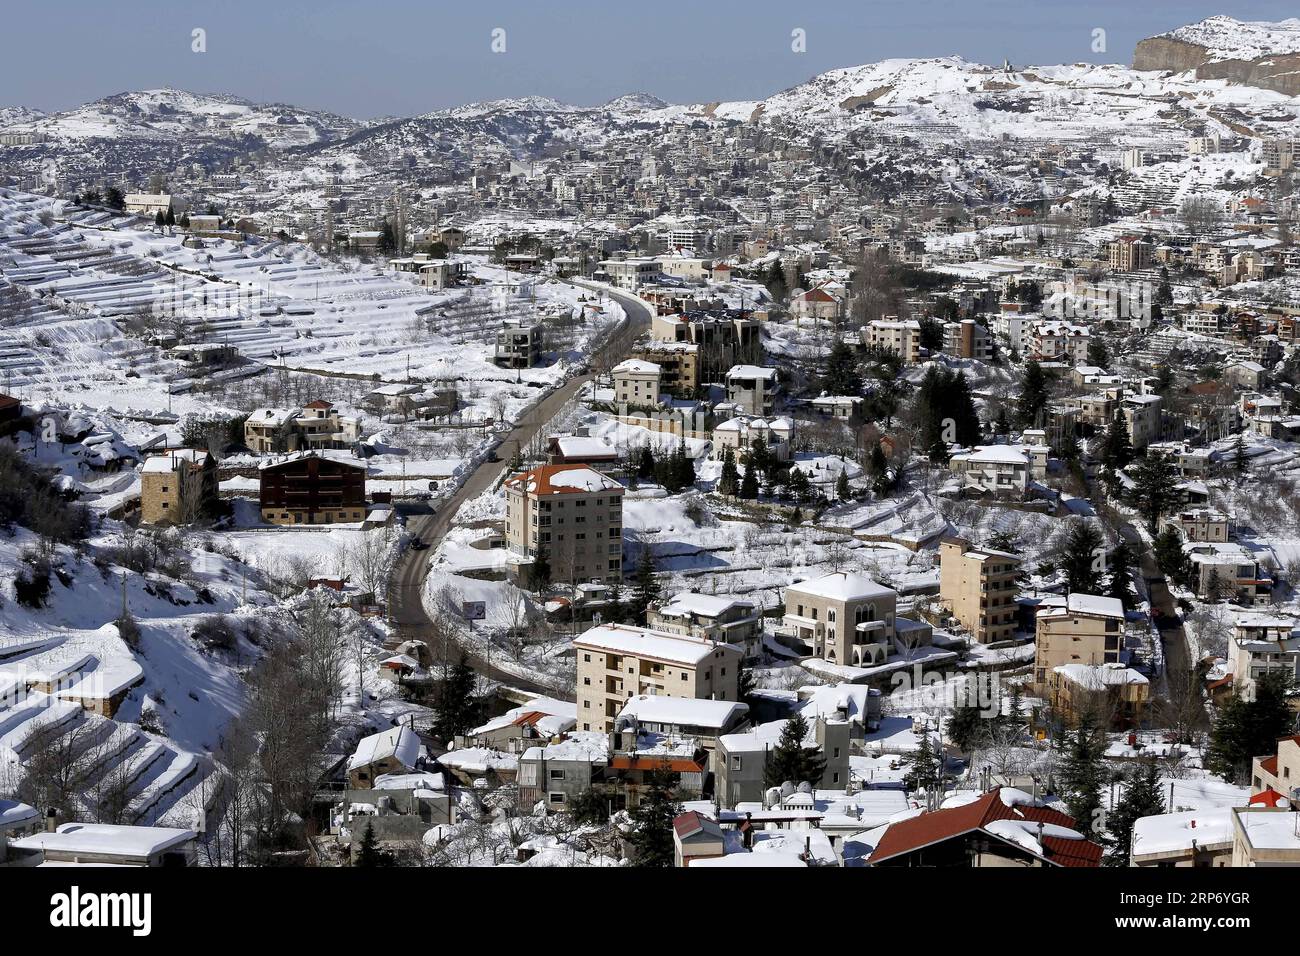 (190122) -- BEIRUT, Jan. 22, 2019 -- Photo taken on Jan. 22, 2019 shows the snow-covered Faraya, a resort town in Lebanon. The storms hit Lebanon in the past month, bringing snow to several towns and areas lying 700 meters or more above sea level. ) LEBANON-FARAYA-SNOW BilalxJawich PUBLICATIONxNOTxINxCHN Stock Photo